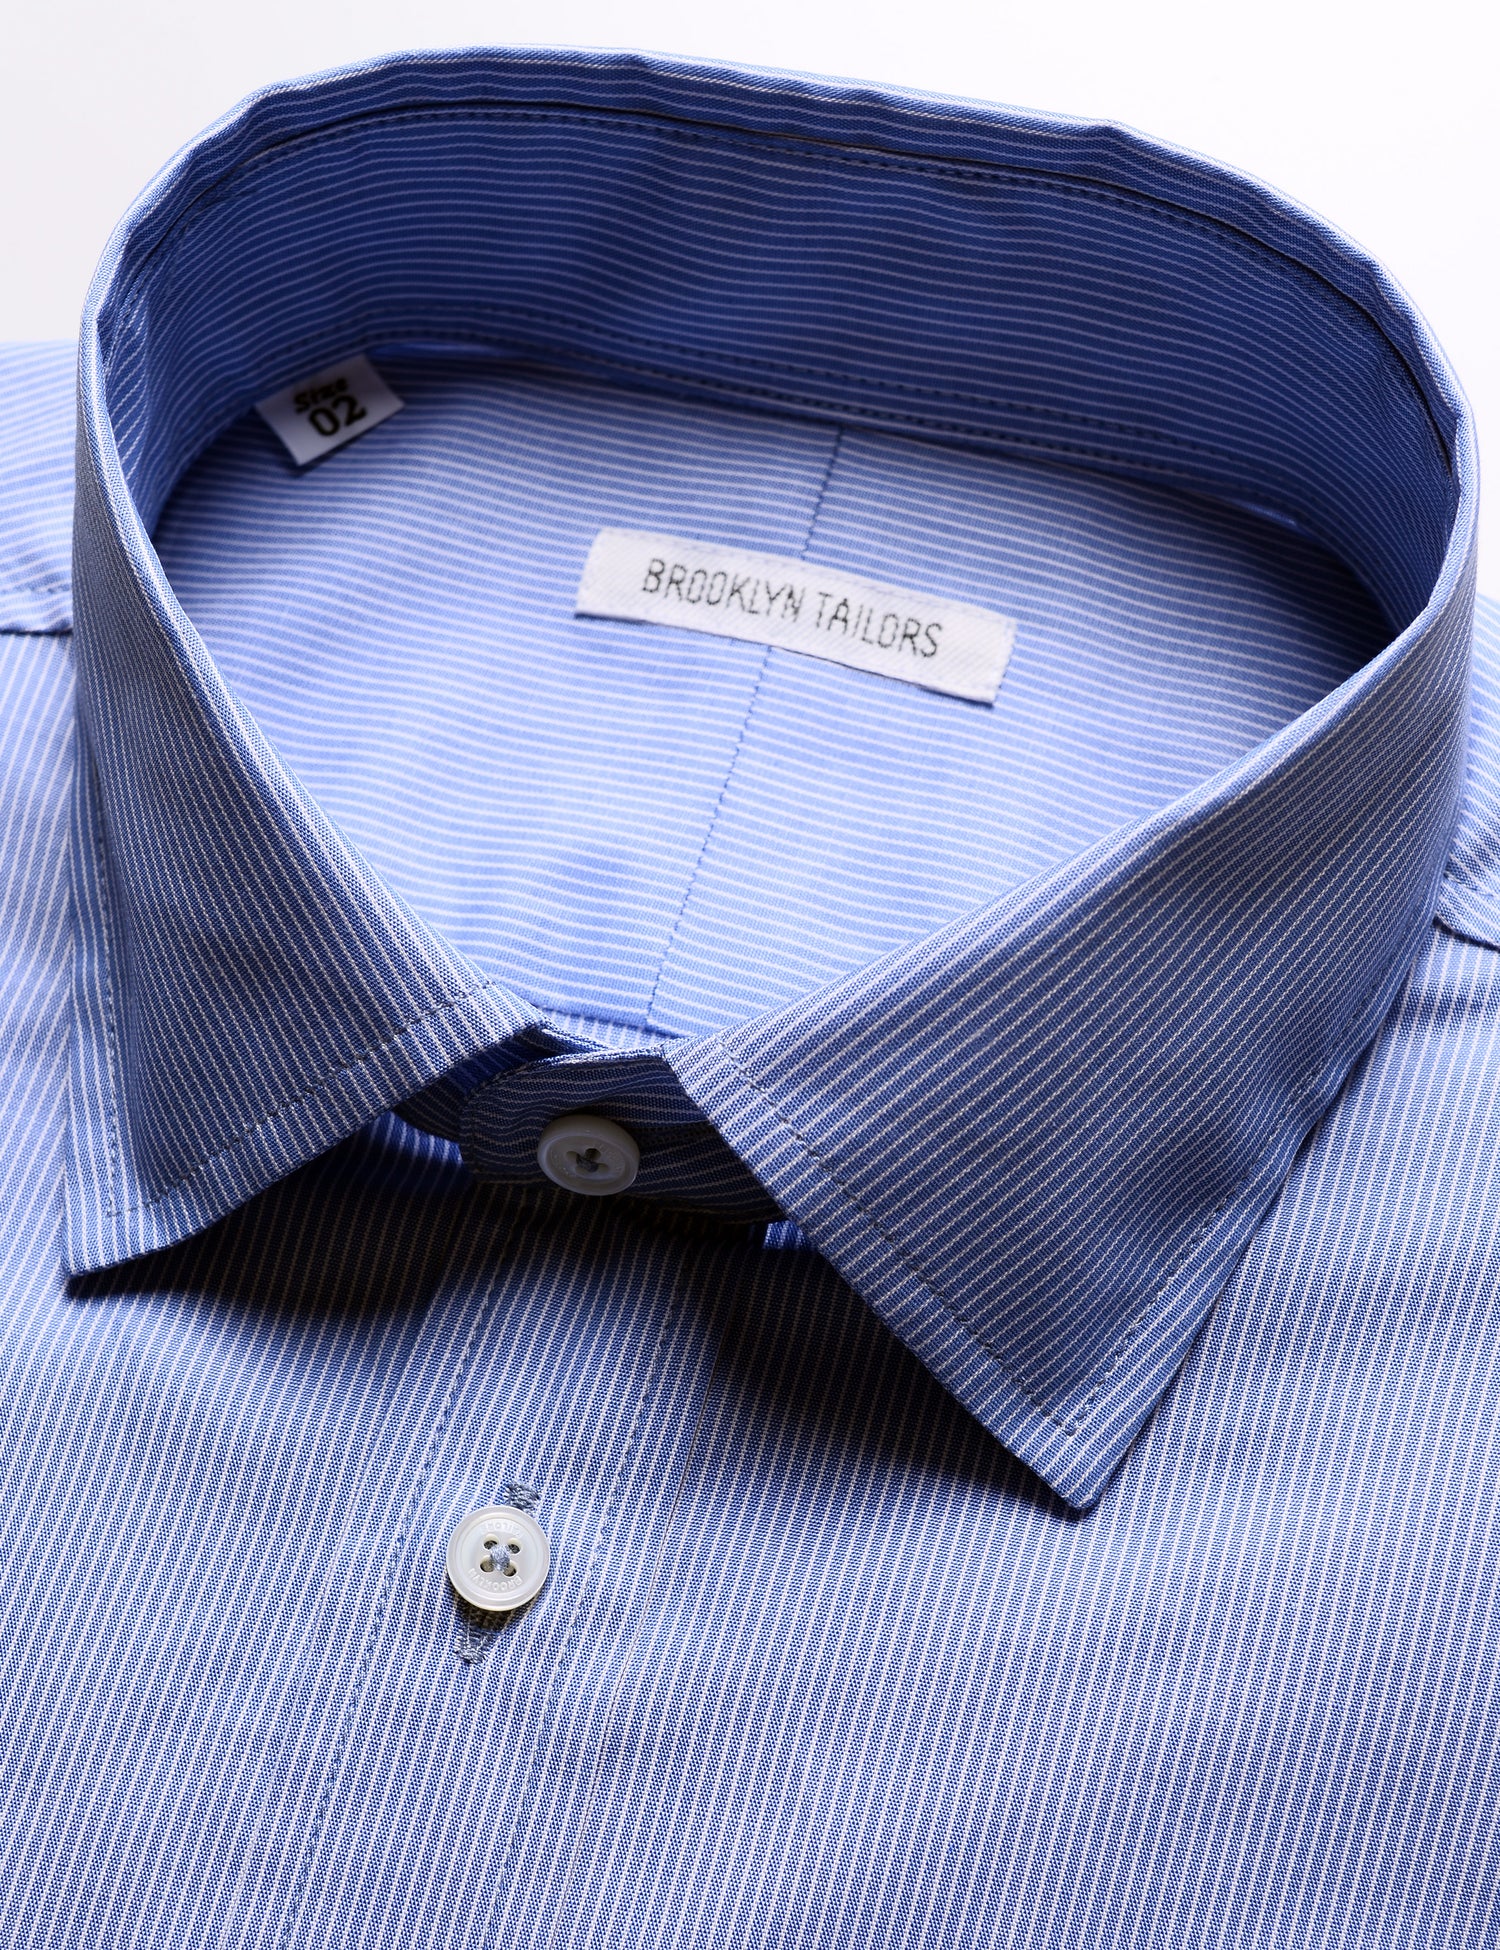 Detail shot of collar, buttons, labeling, and fabric pattern on Brooklyn Tailors BKT20 Slim Dress Shirt in Professional Stripe - Imperial Blue